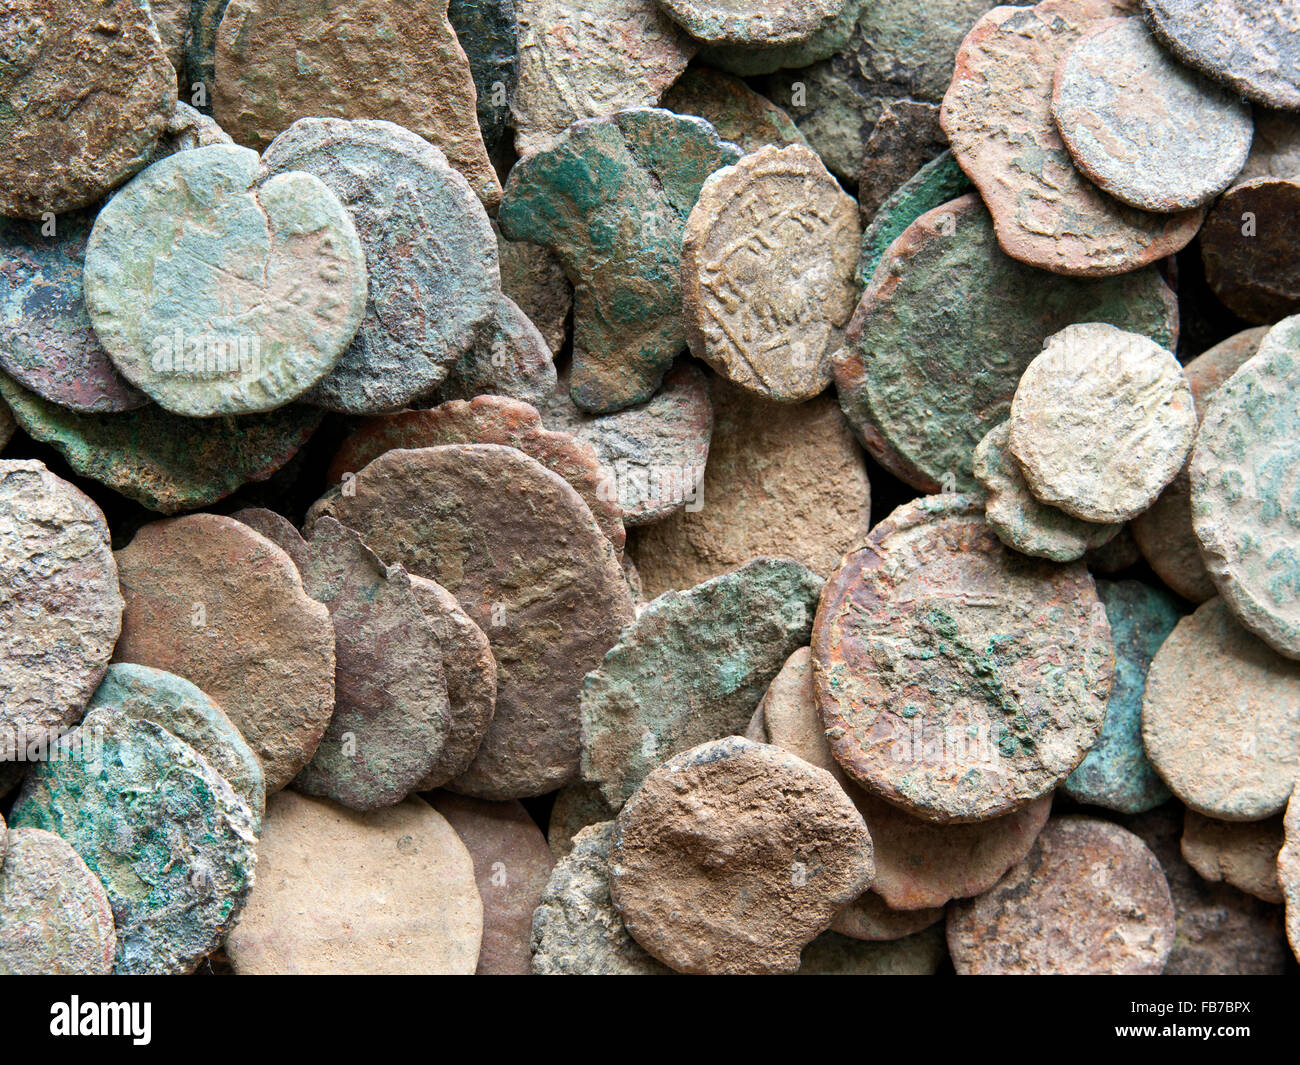 Pile of Roman coins showing the damaging effects farmer's acidic chemicals have on these copper bronze coins. Stock Photo